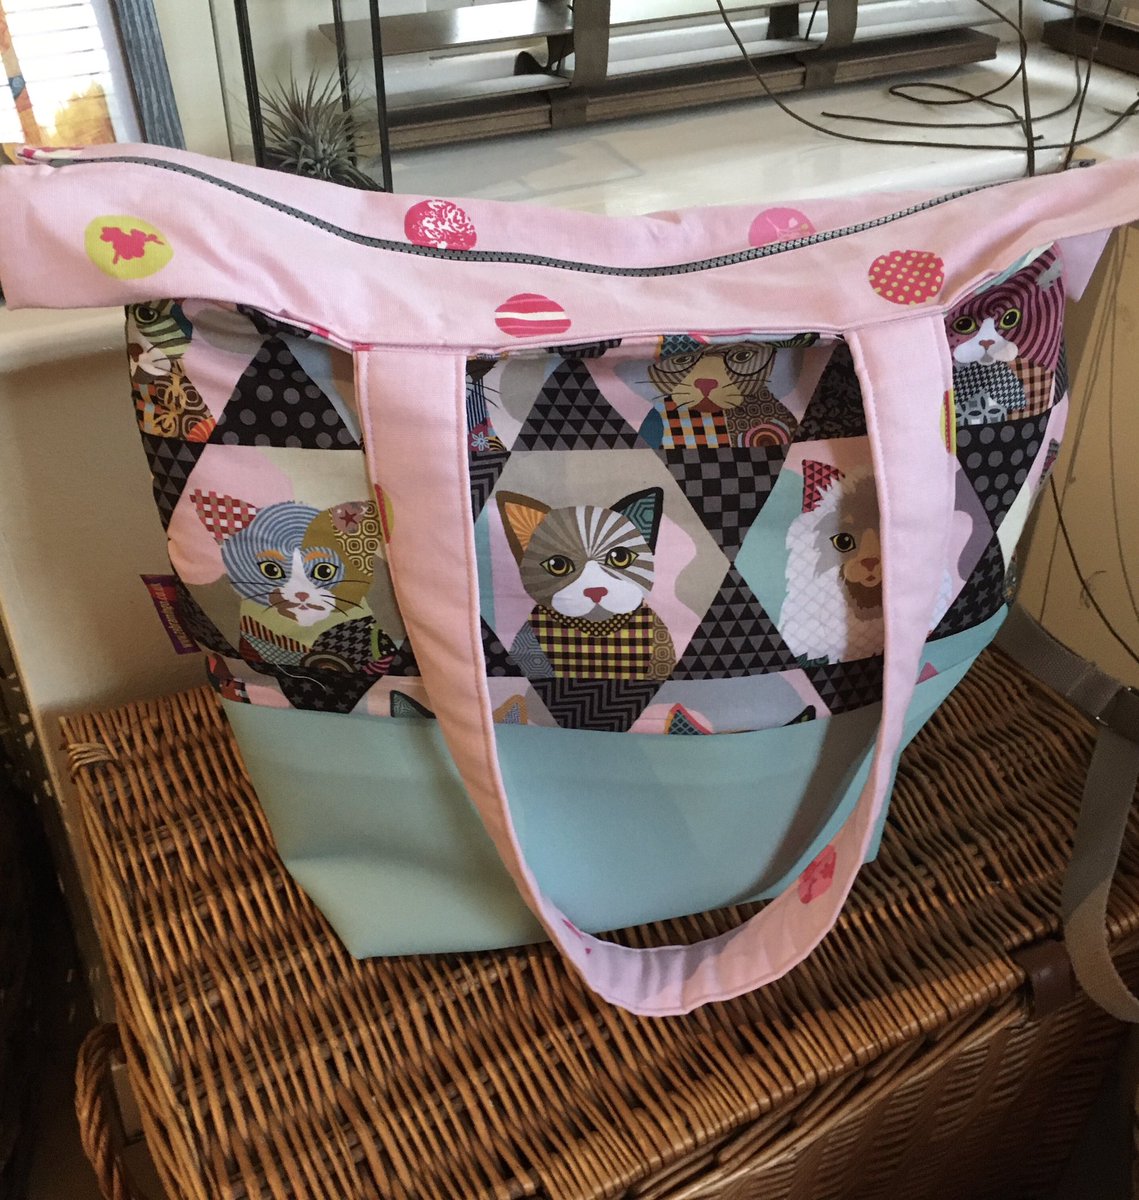 Good morning #elevenseshour Loved making these large free-standing bags with little bag feet, three slip pockets and zip closure. Which one is your favourite? #shopsmall #CatsOfTwitter